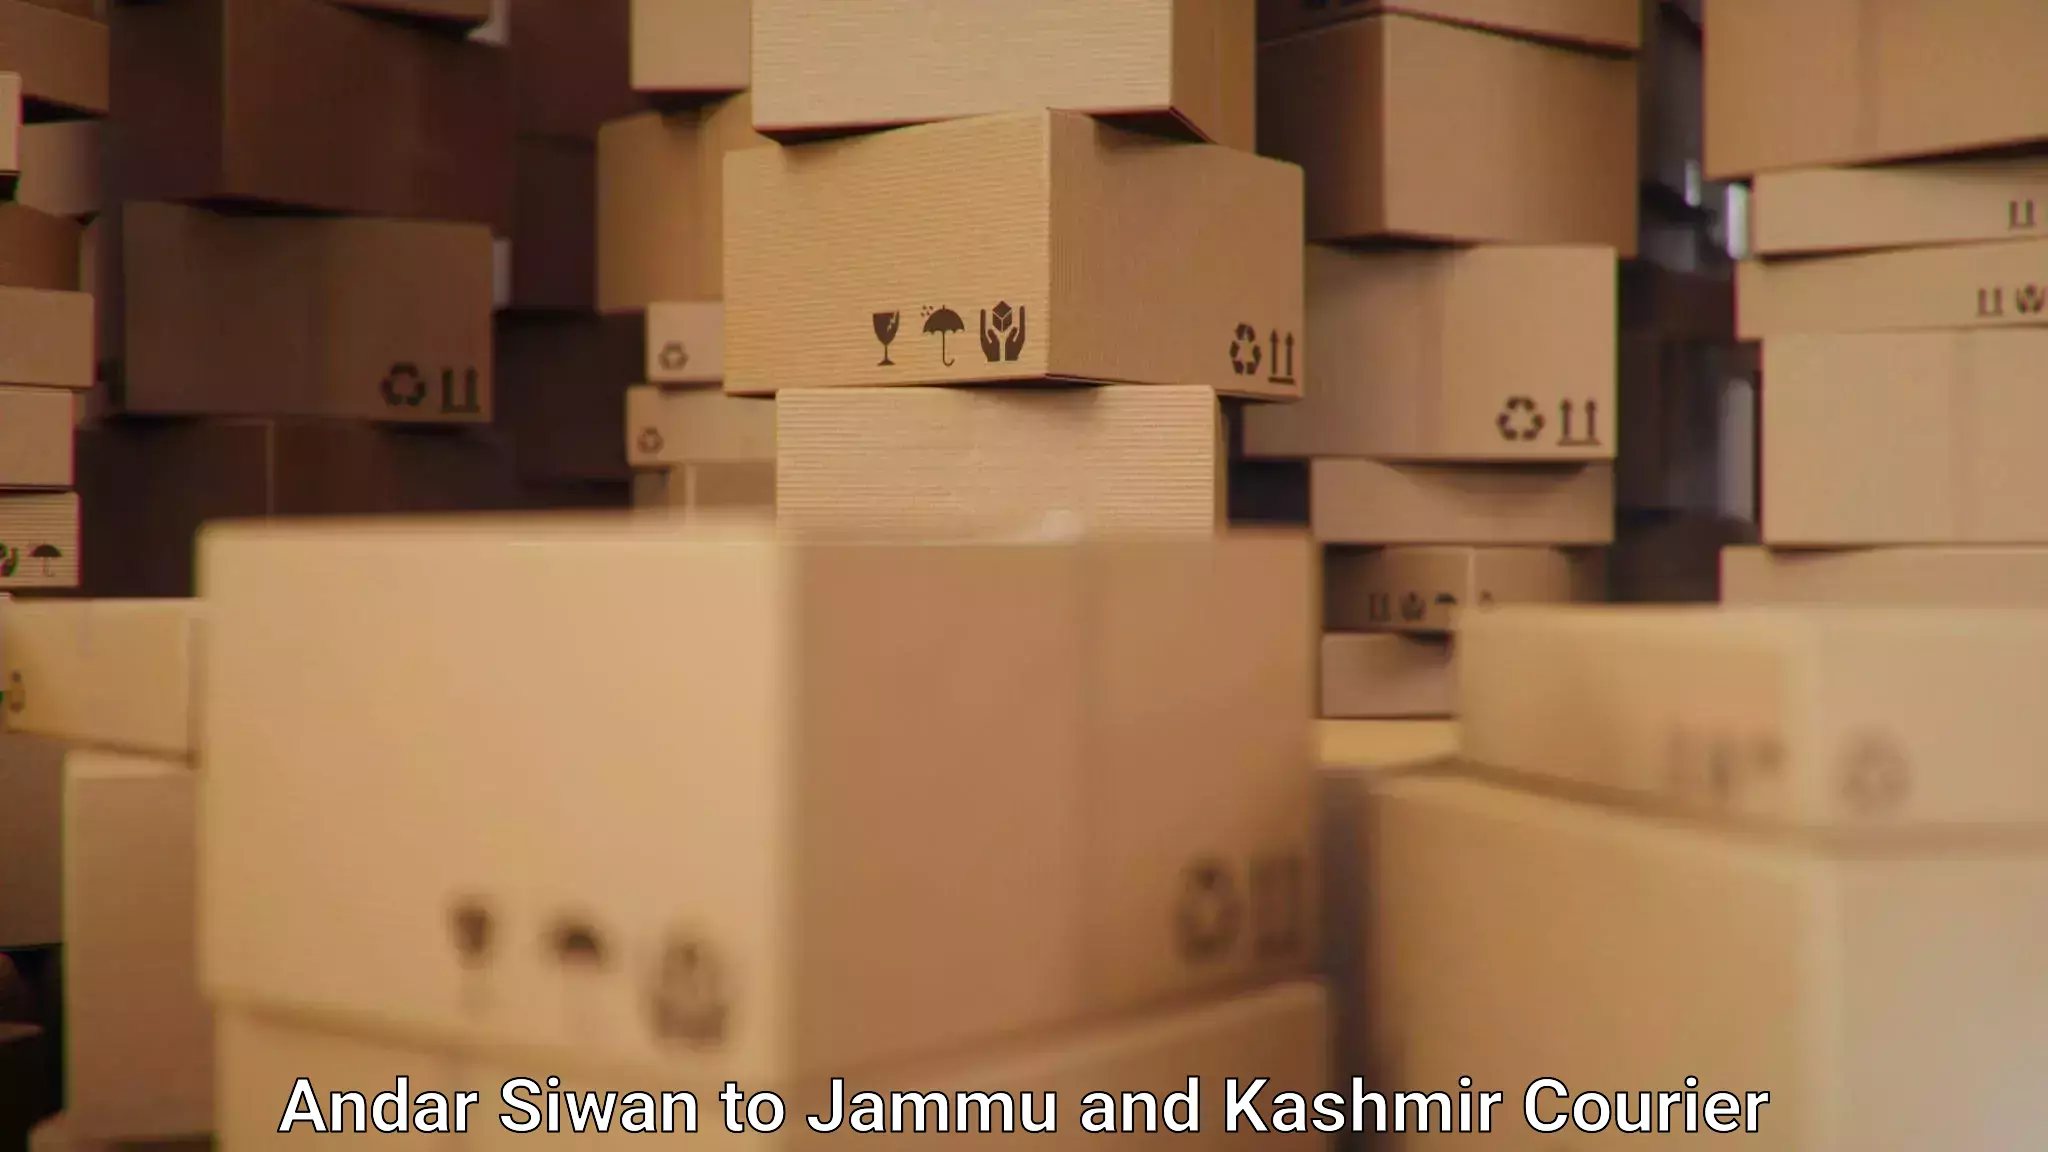 Parcel service for businesses Andar Siwan to Jammu and Kashmir